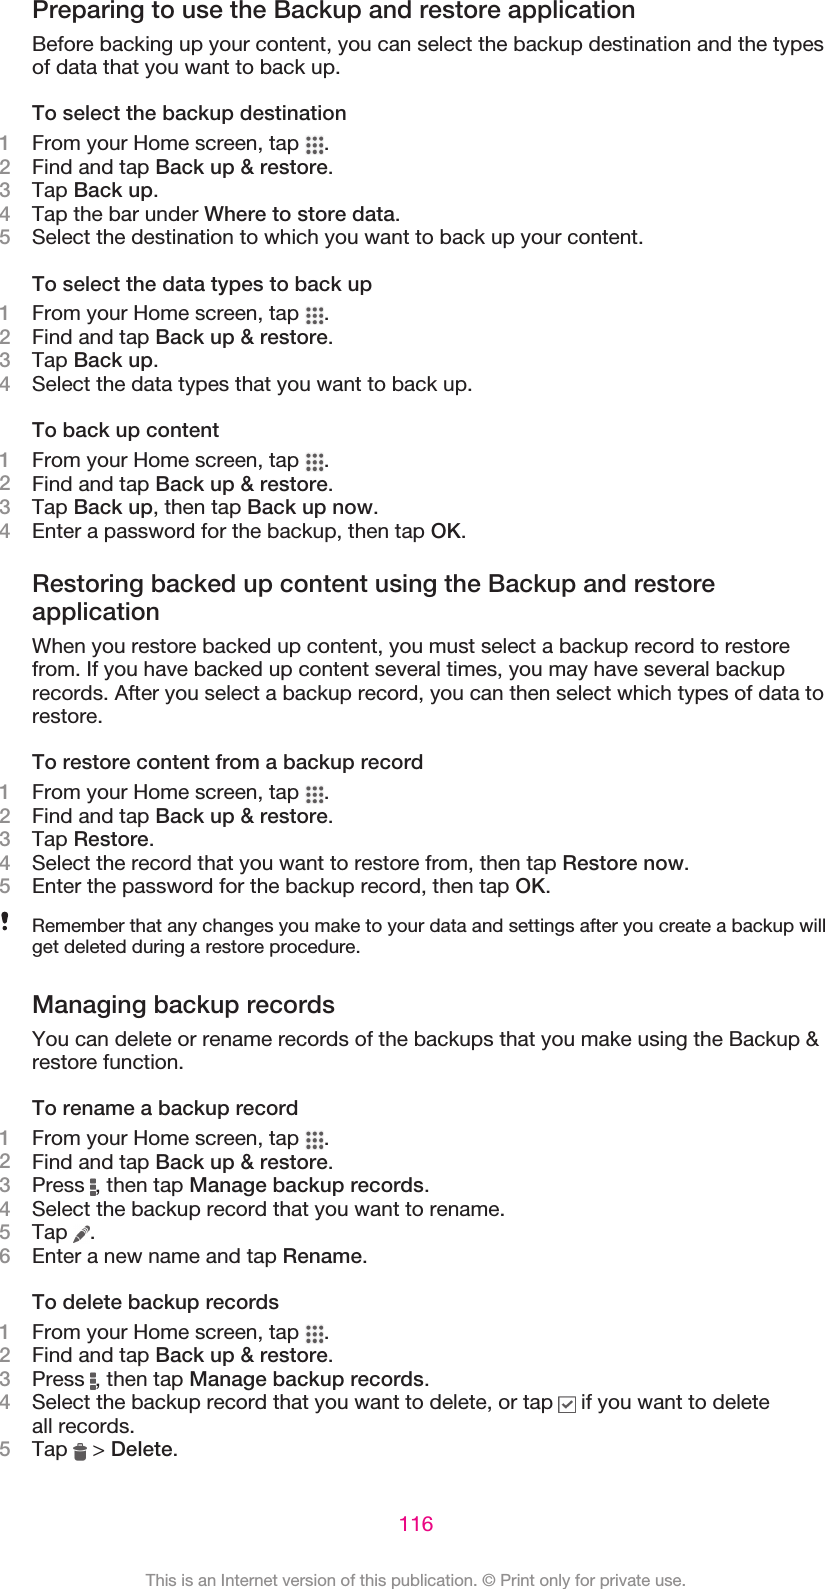 Preparing to use the Backup and restore applicationBefore backing up your content, you can select the backup destination and the typesof data that you want to back up.To select the backup destination1From your Home screen, tap  .2Find and tap Back up &amp; restore.3Tap Back up.4Tap the bar under Where to store data.5Select the destination to which you want to back up your content.To select the data types to back up1From your Home screen, tap  .2Find and tap Back up &amp; restore.3Tap Back up.4Select the data types that you want to back up.To back up content1From your Home screen, tap  .2Find and tap Back up &amp; restore.3Tap Back up, then tap Back up now.4Enter a password for the backup, then tap OK.Restoring backed up content using the Backup and restoreapplicationWhen you restore backed up content, you must select a backup record to restorefrom. If you have backed up content several times, you may have several backuprecords. After you select a backup record, you can then select which types of data torestore.To restore content from a backup record1From your Home screen, tap  .2Find and tap Back up &amp; restore.3Tap Restore.4Select the record that you want to restore from, then tap Restore now.5Enter the password for the backup record, then tap OK.Remember that any changes you make to your data and settings after you create a backup willget deleted during a restore procedure.Managing backup recordsYou can delete or rename records of the backups that you make using the Backup &amp;restore function.To rename a backup record1From your Home screen, tap  .2Find and tap Back up &amp; restore.3Press  , then tap Manage backup records.4Select the backup record that you want to rename.5Tap  .6Enter a new name and tap Rename.To delete backup records1From your Home screen, tap  .2Find and tap Back up &amp; restore.3Press  , then tap Manage backup records.4Select the backup record that you want to delete, or tap   if you want to deleteall records.5Tap   &gt; Delete.116This is an Internet version of this publication. © Print only for private use.